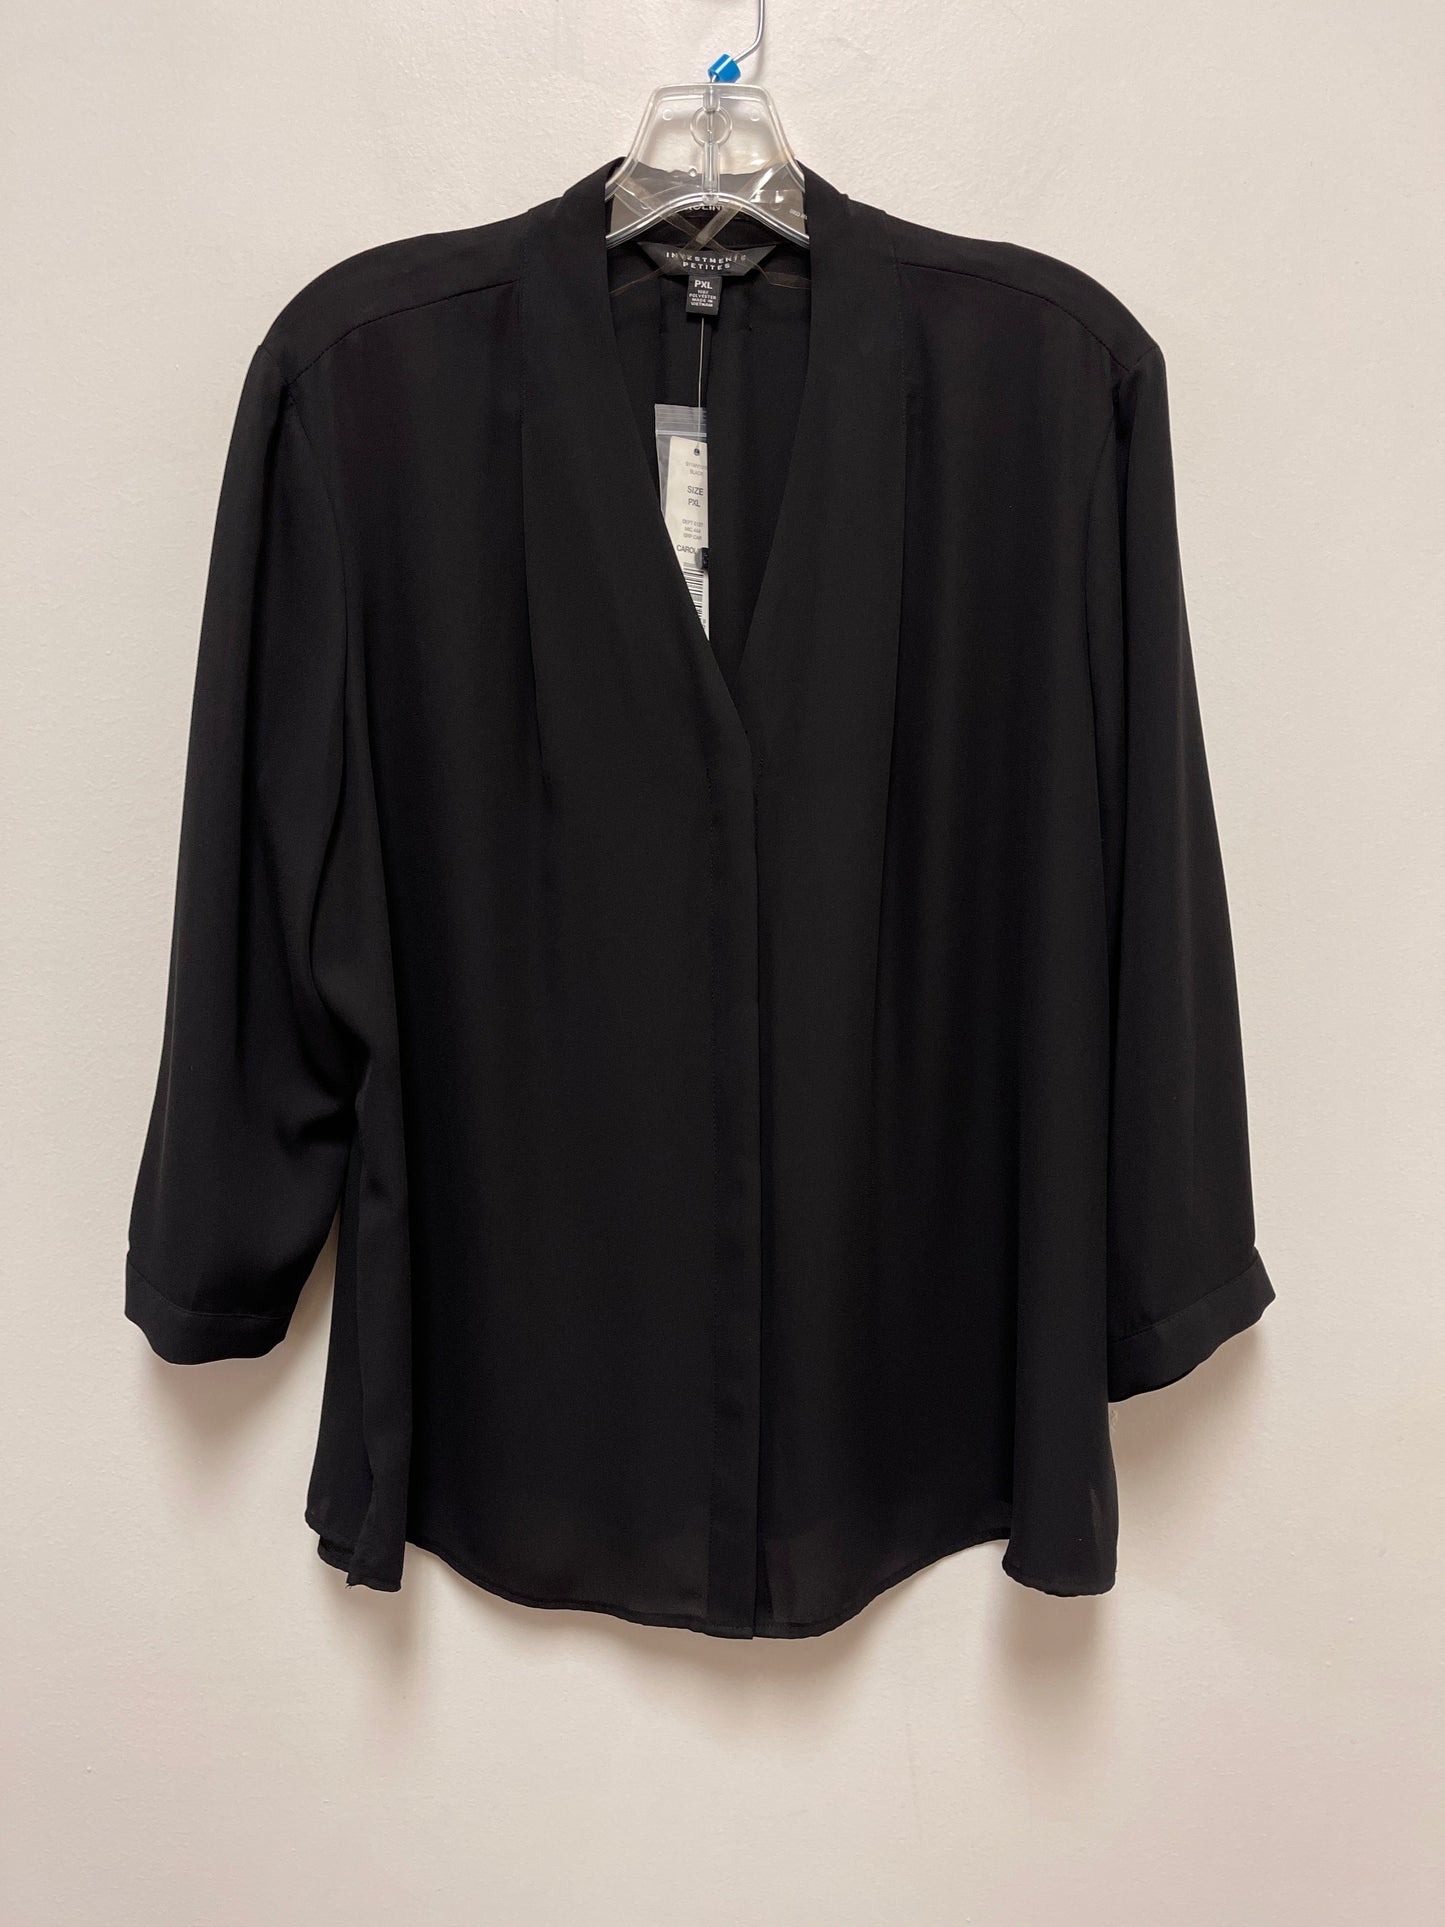 Black Top Long Sleeve Investments, Size Xl